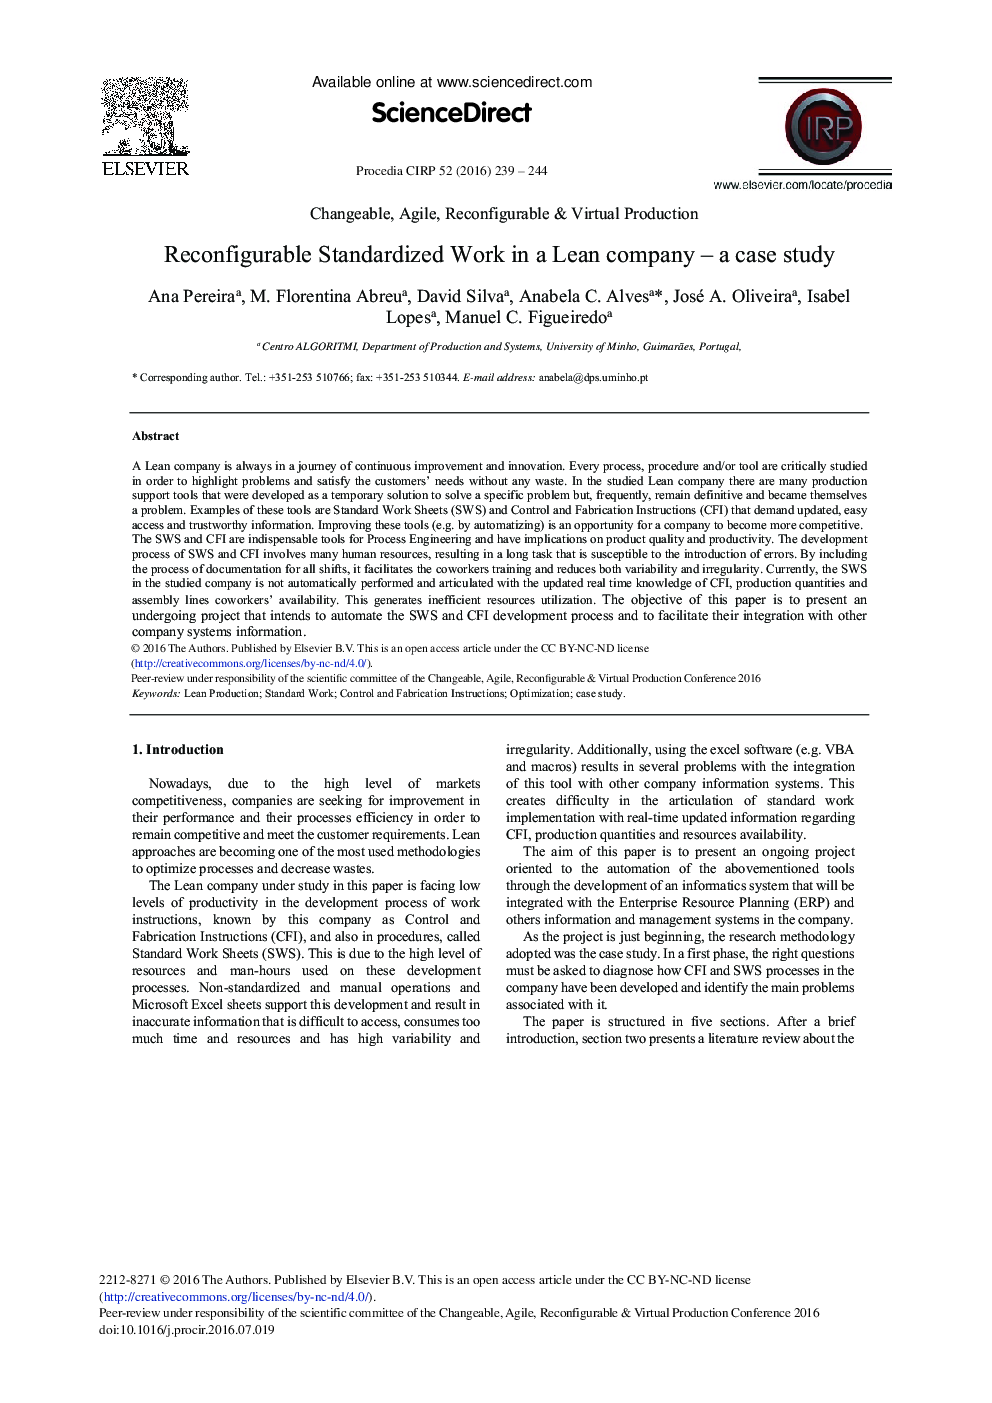 Reconfigurable Standardized Work in a Lean Company – A Case Study 